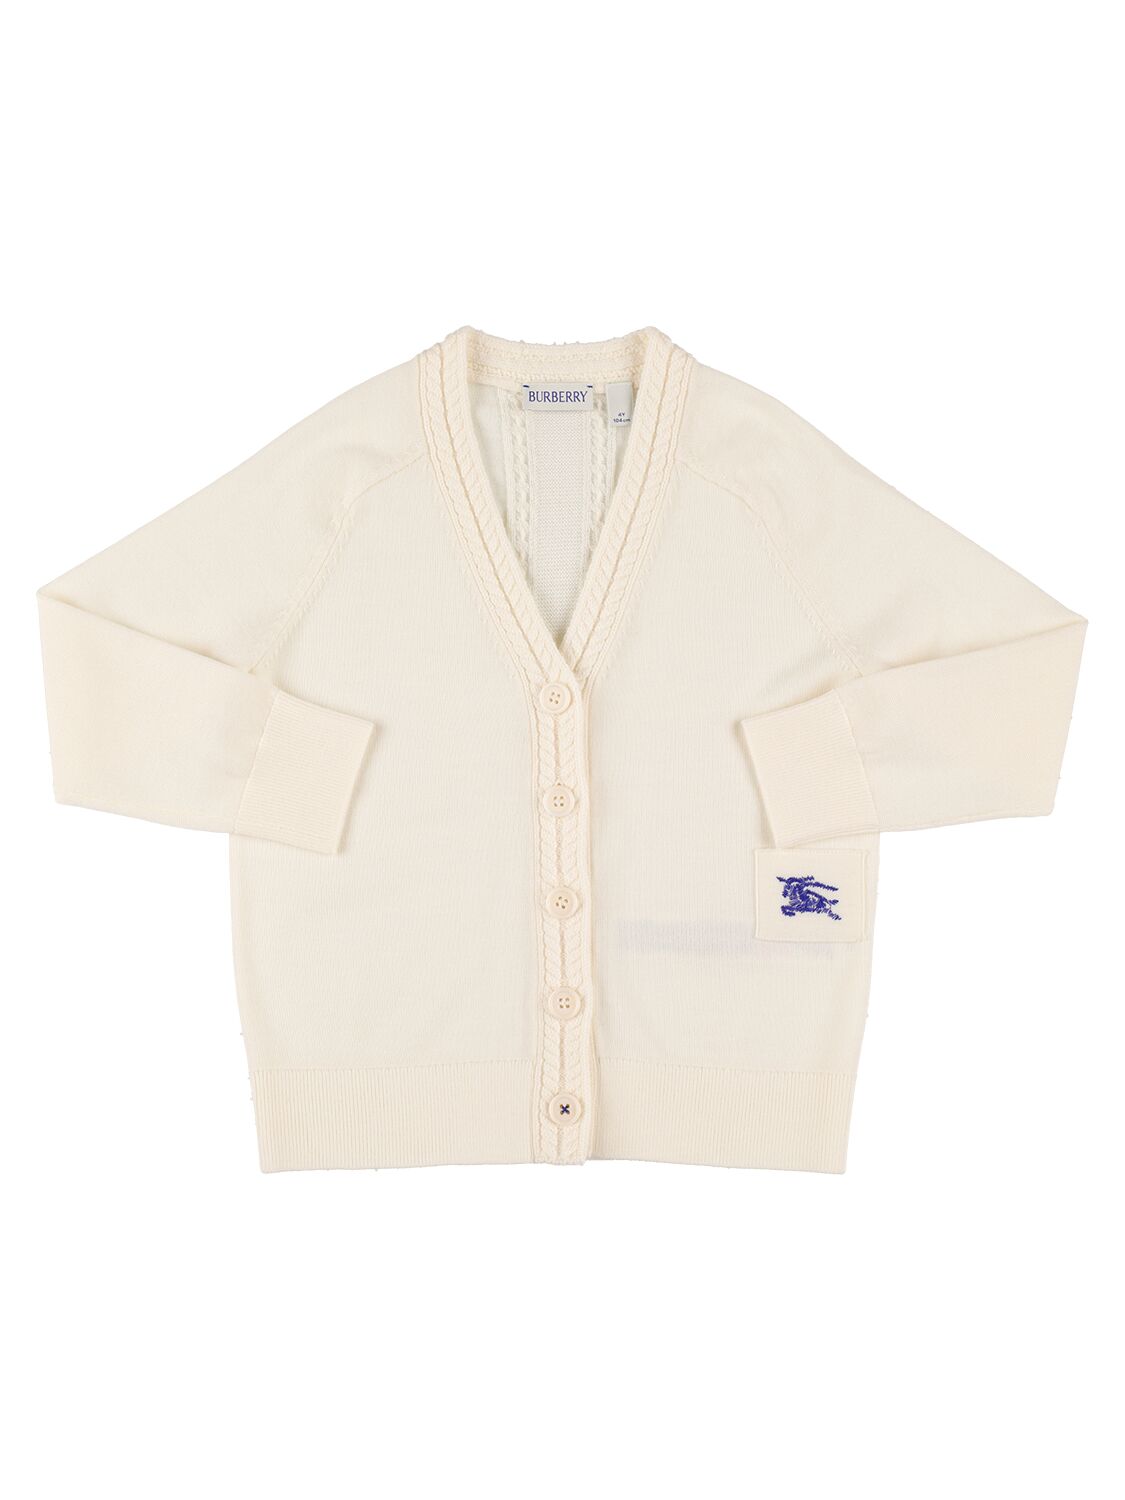 Burberry Kids' Check Print Wool Cardigan In Neutral